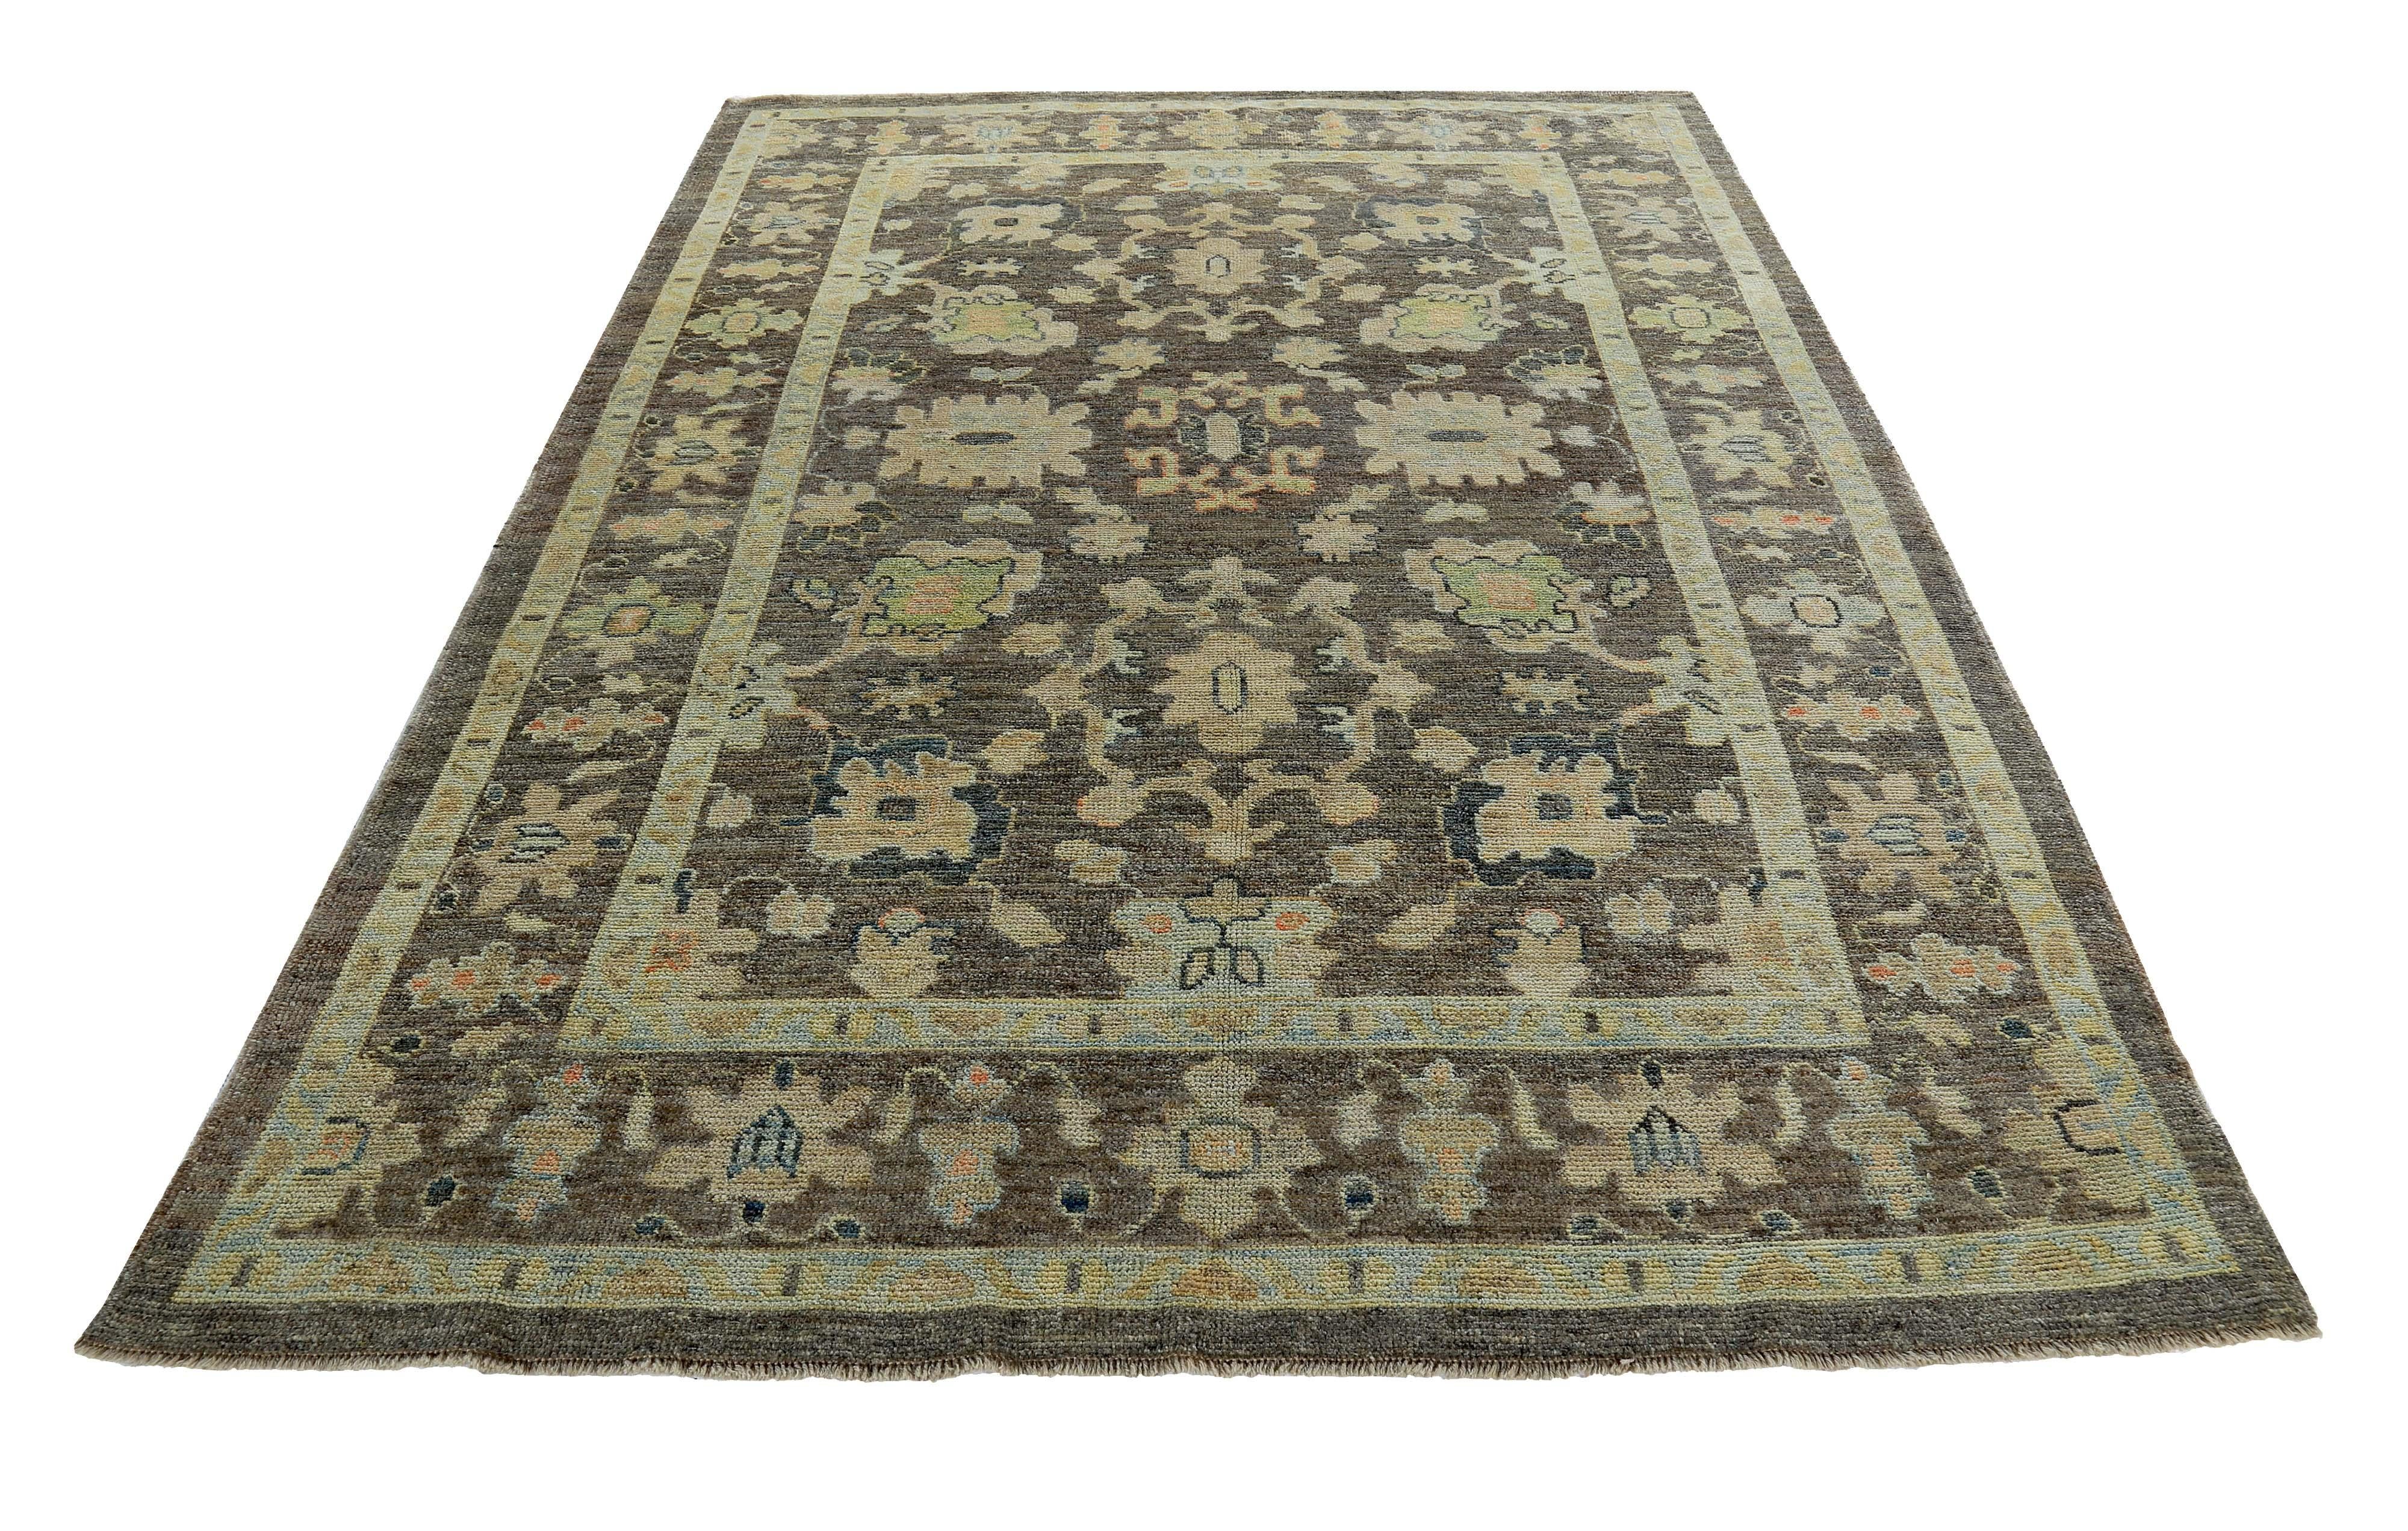 Turkish rug made of handwoven sheep’s wool of the finest quality. It’s colored with organic vegetable dyes that are certified safe for humans and pets alike. It features green, blue and beige flower heads on a beautiful brown field. Flower patterns